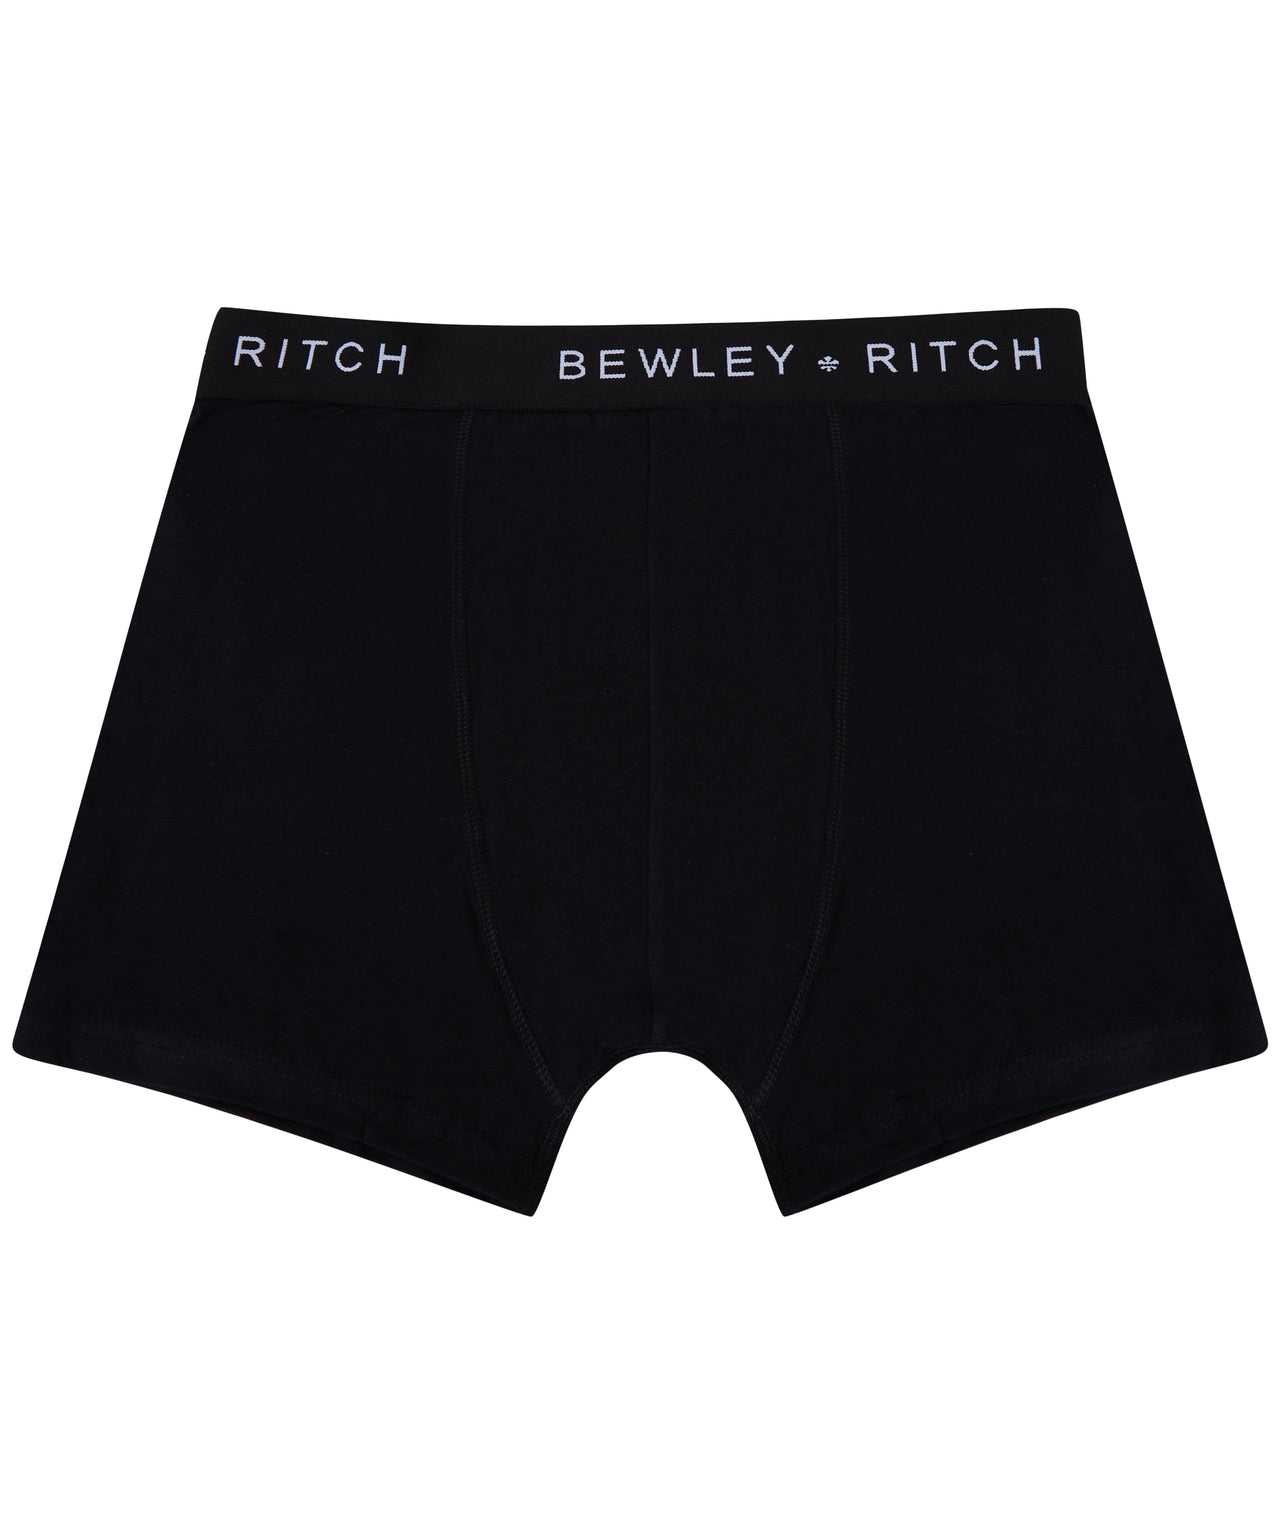 Domoch Boxers 3pk Assorted